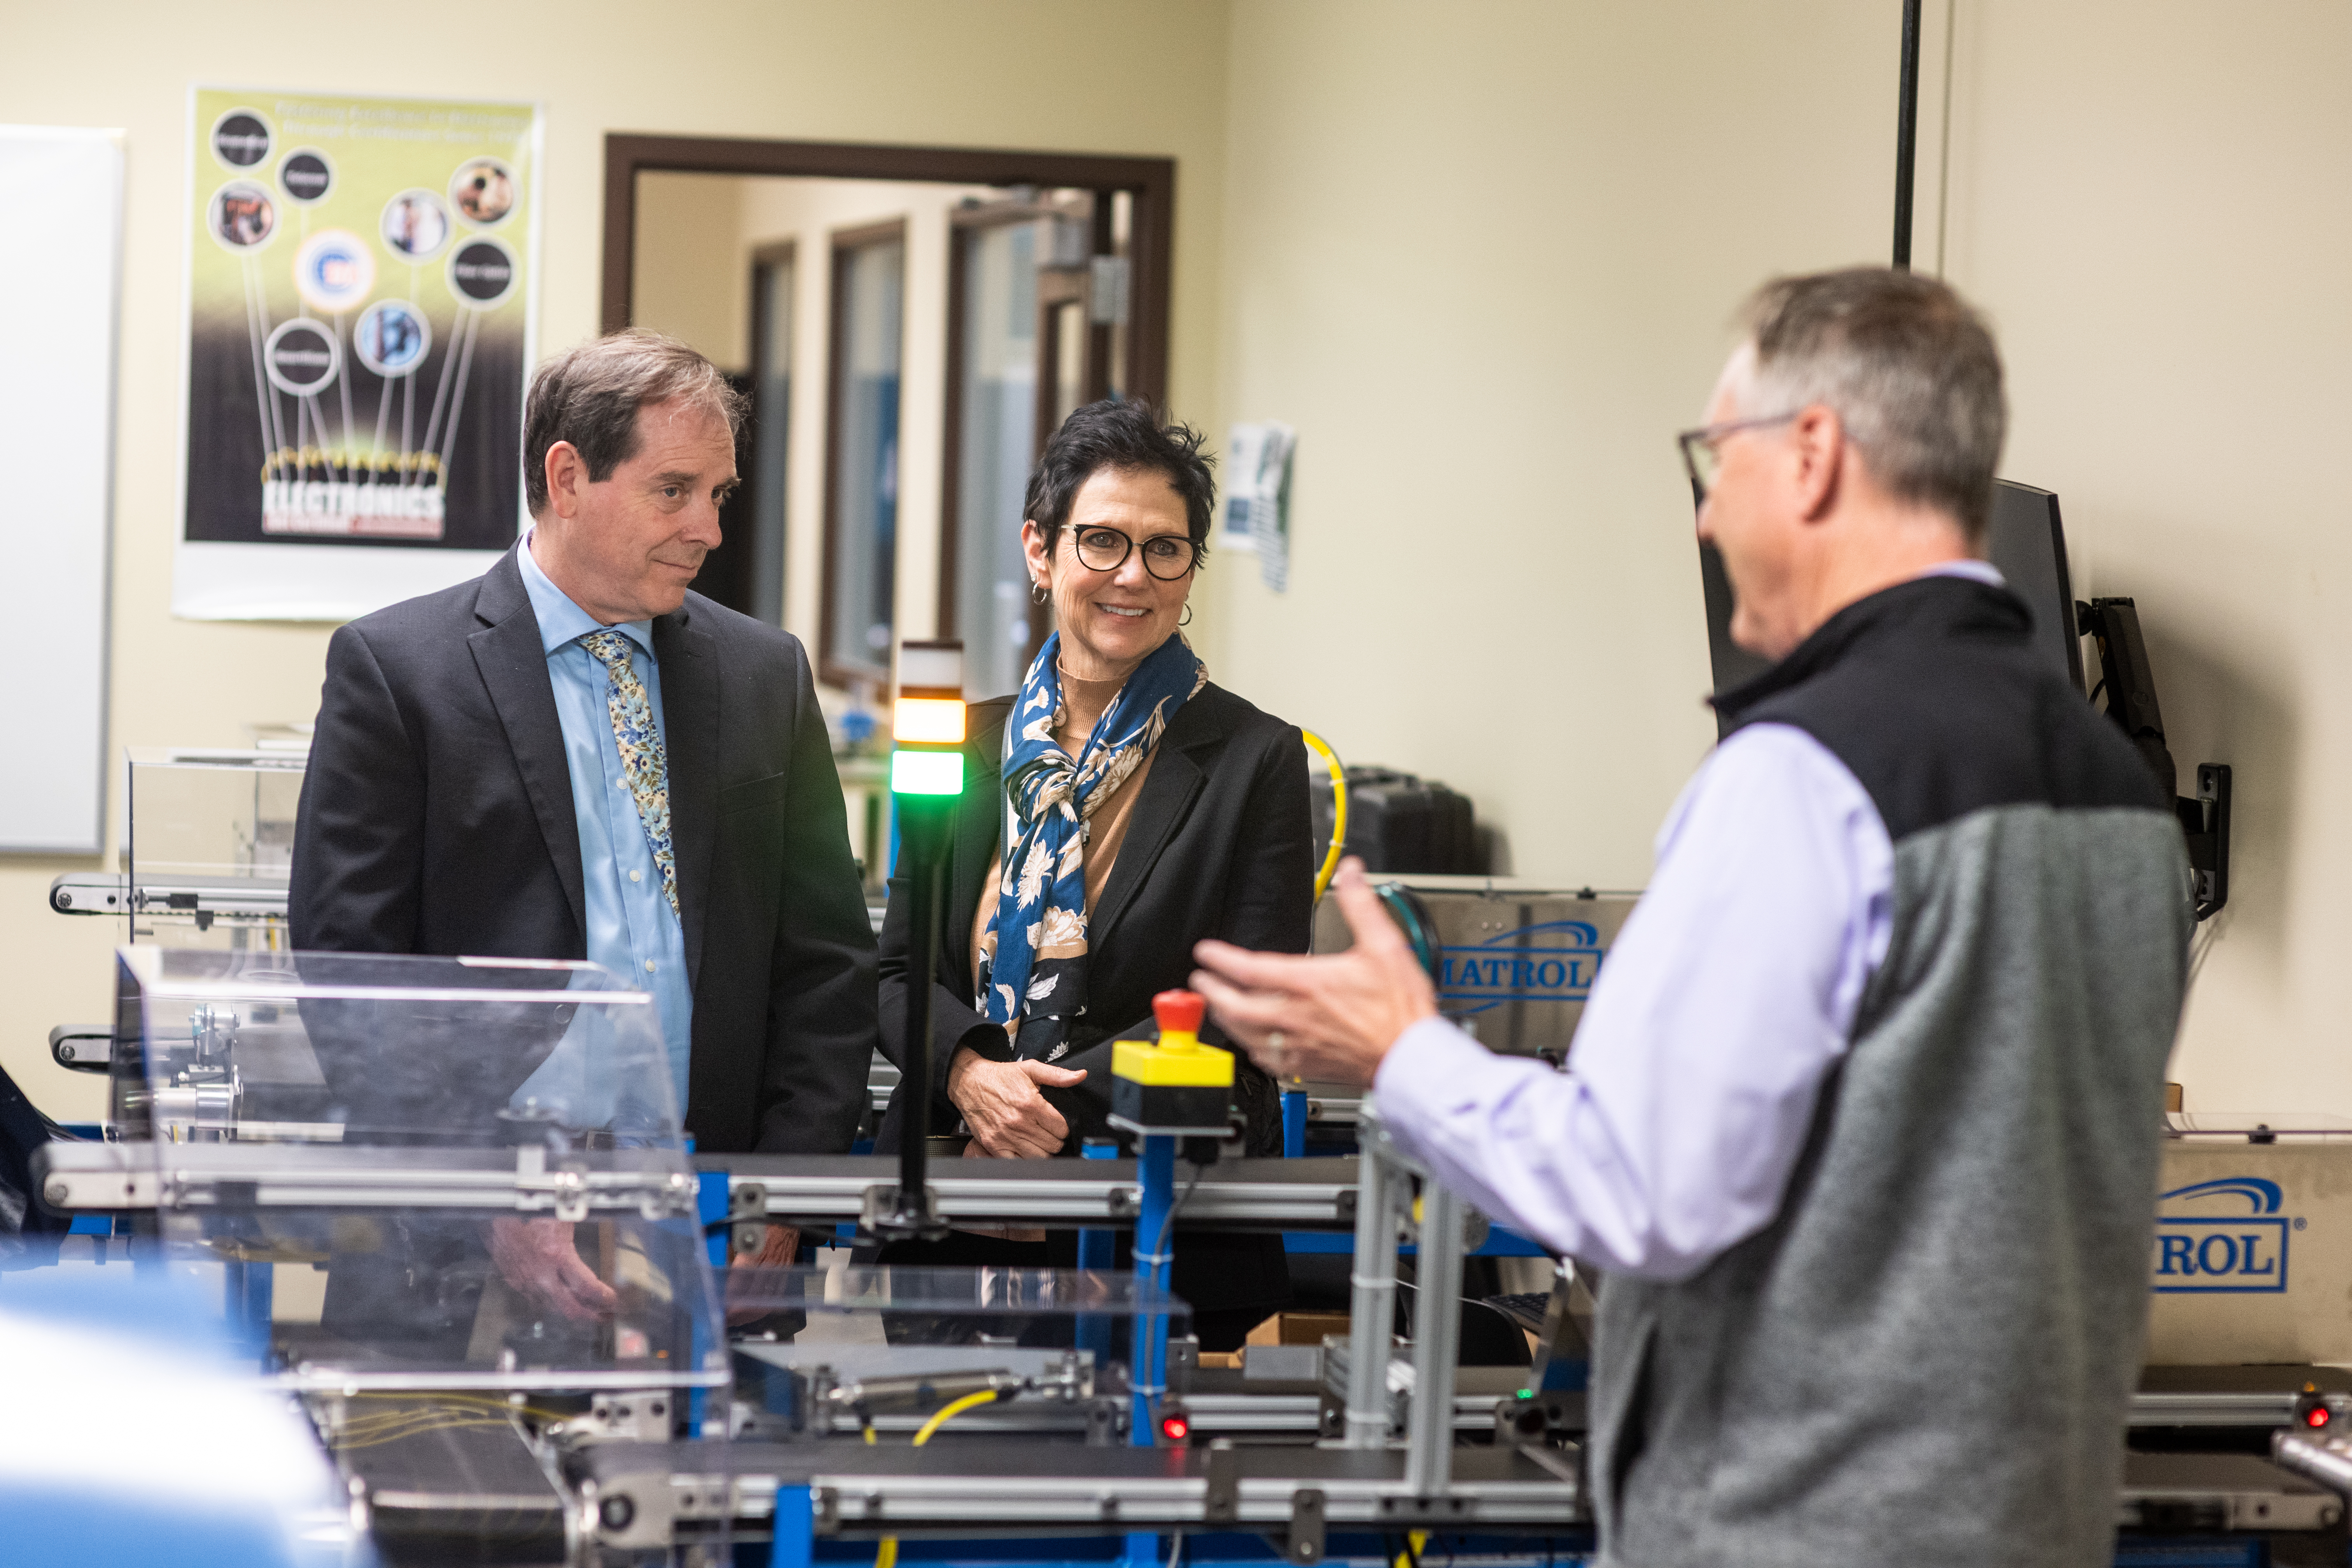 SUNY Oswego leaders met with colleagues from College of Western Idaho University to discuss their partnerships with Micron. Robert Novak (at right), chair of the Engineering Department for College Western Idaho University, shows some of the developed technology to SUNY Oswego's Provost and Vice President for Academic Affairs and Vice President for University Advancement Mary Canale. 